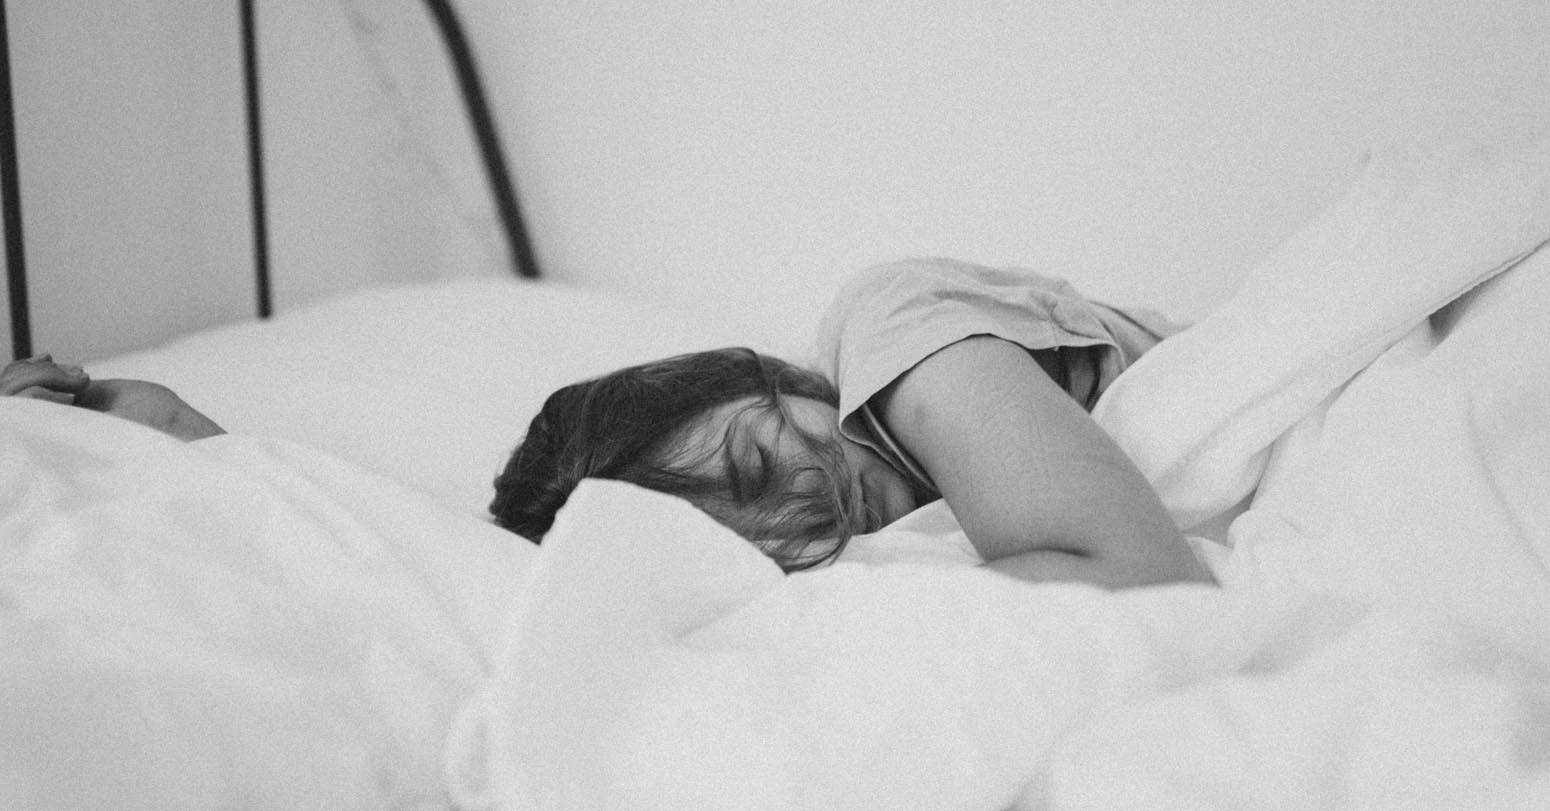 Have Trouble Sleeping? Here's 5 Expert Tips To Get Better Sleep